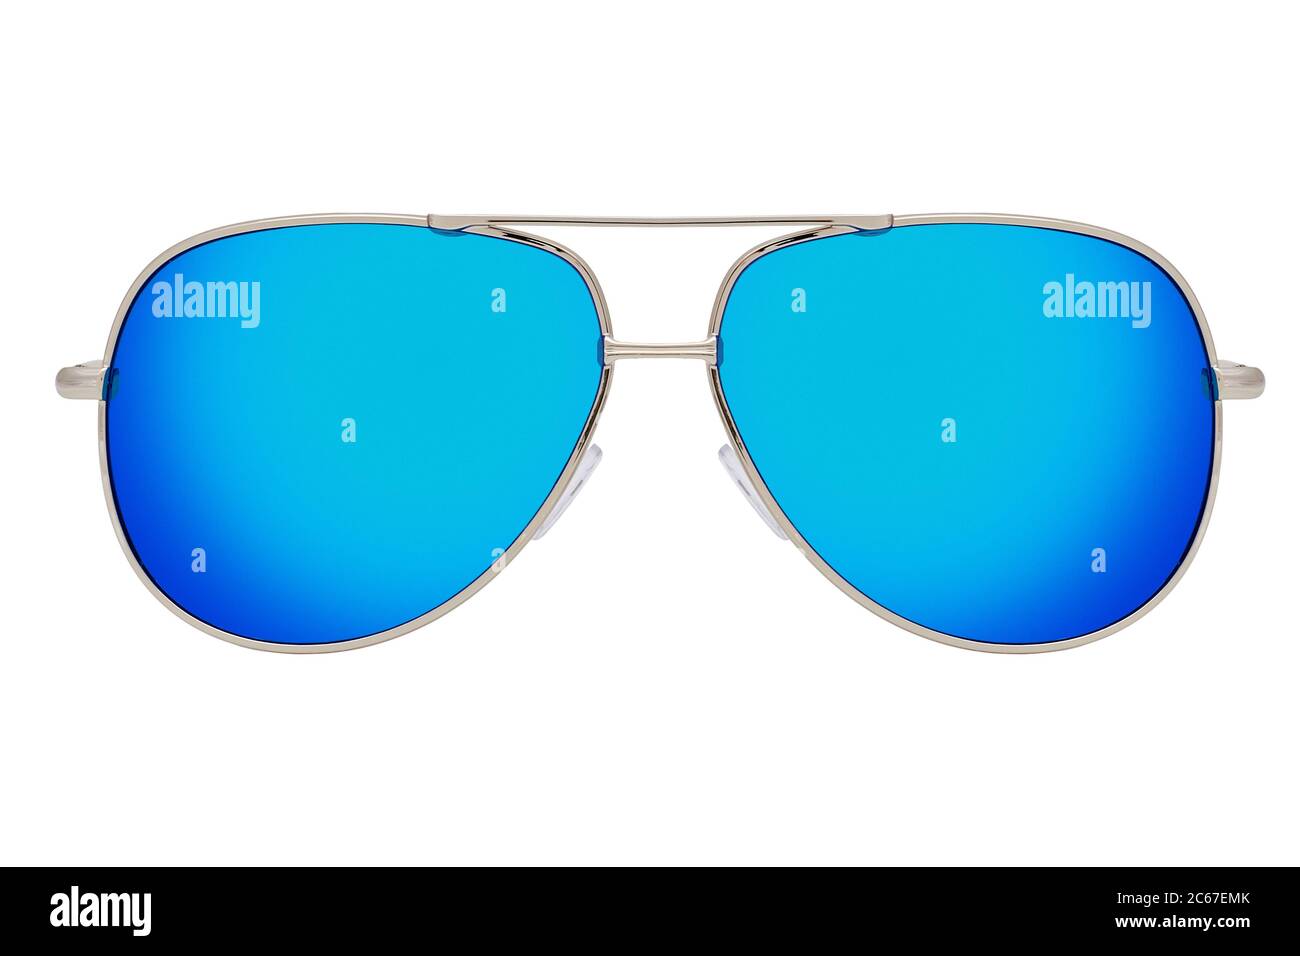 Silver sunglasses with blue lenses isolated on white background Stock Photo